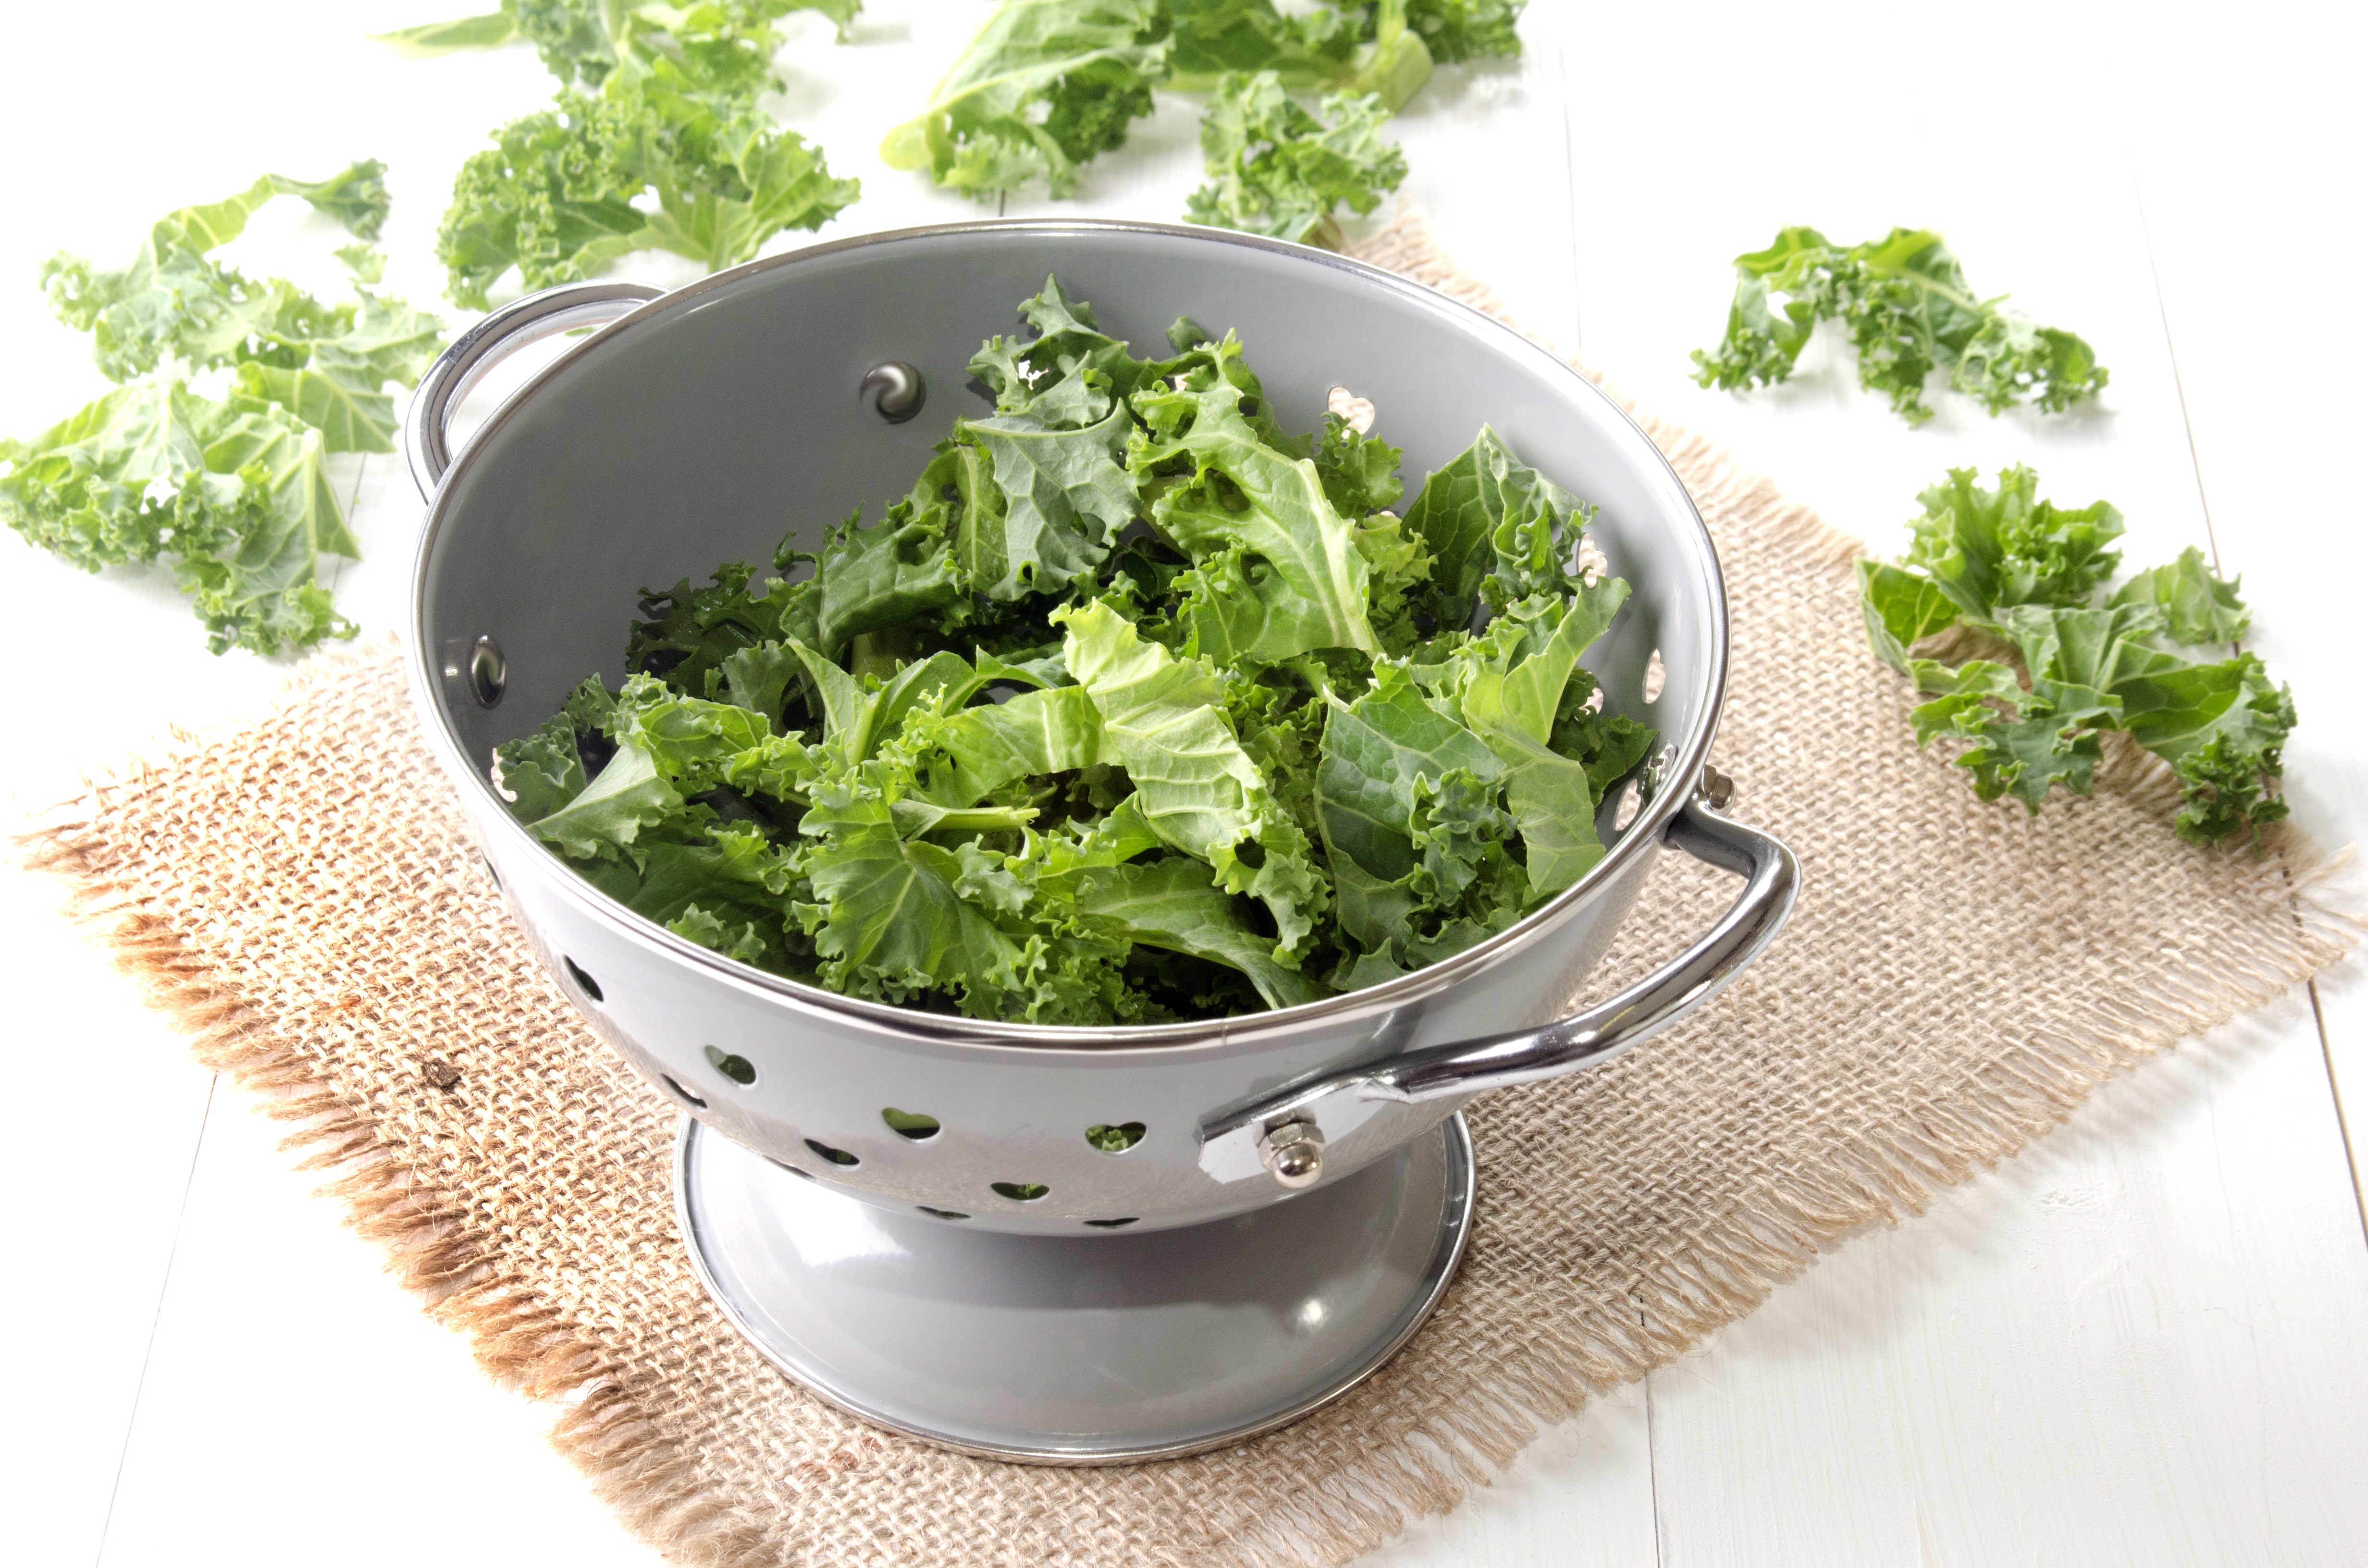 Kale as a healthy bedtime snack